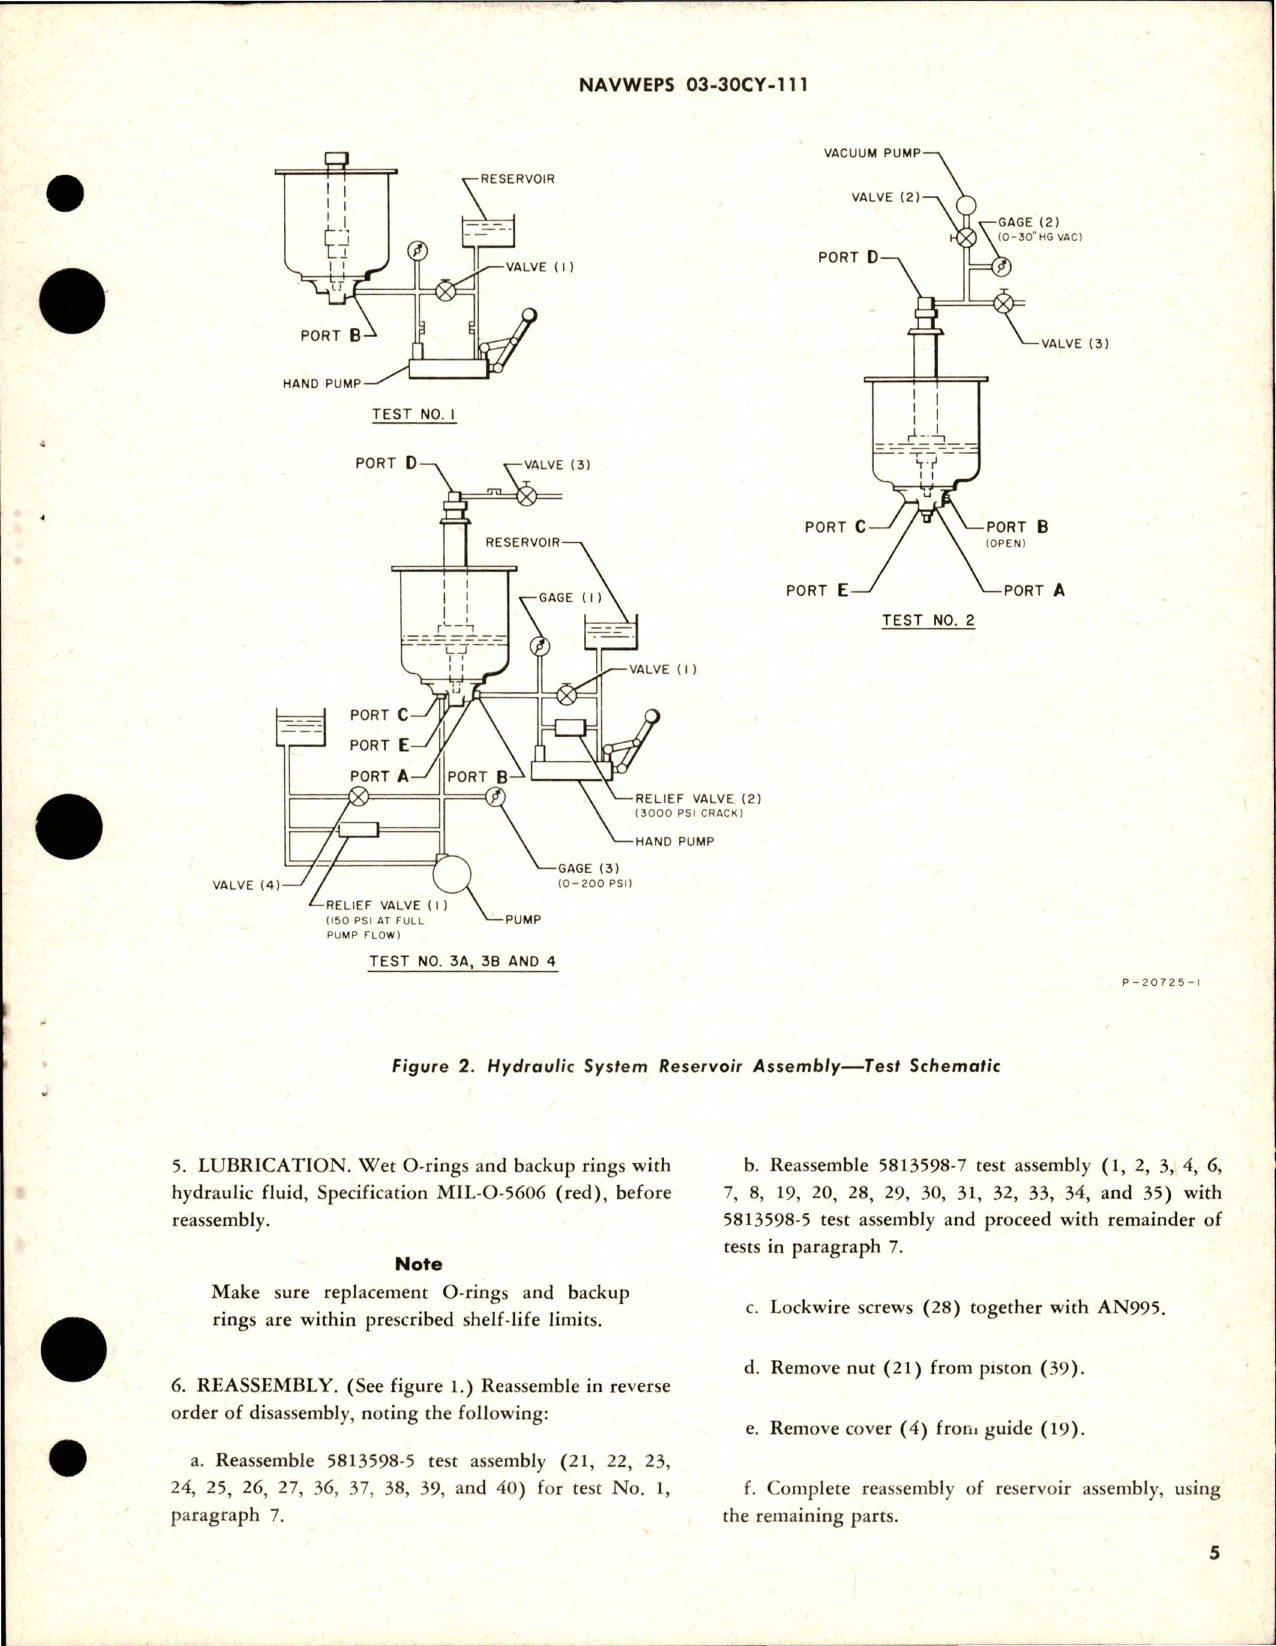 Sample page 5 from AirCorps Library document: Overhaul Instructions with Parts for Hydraulic System Reservoir Assembly - Part 5813598